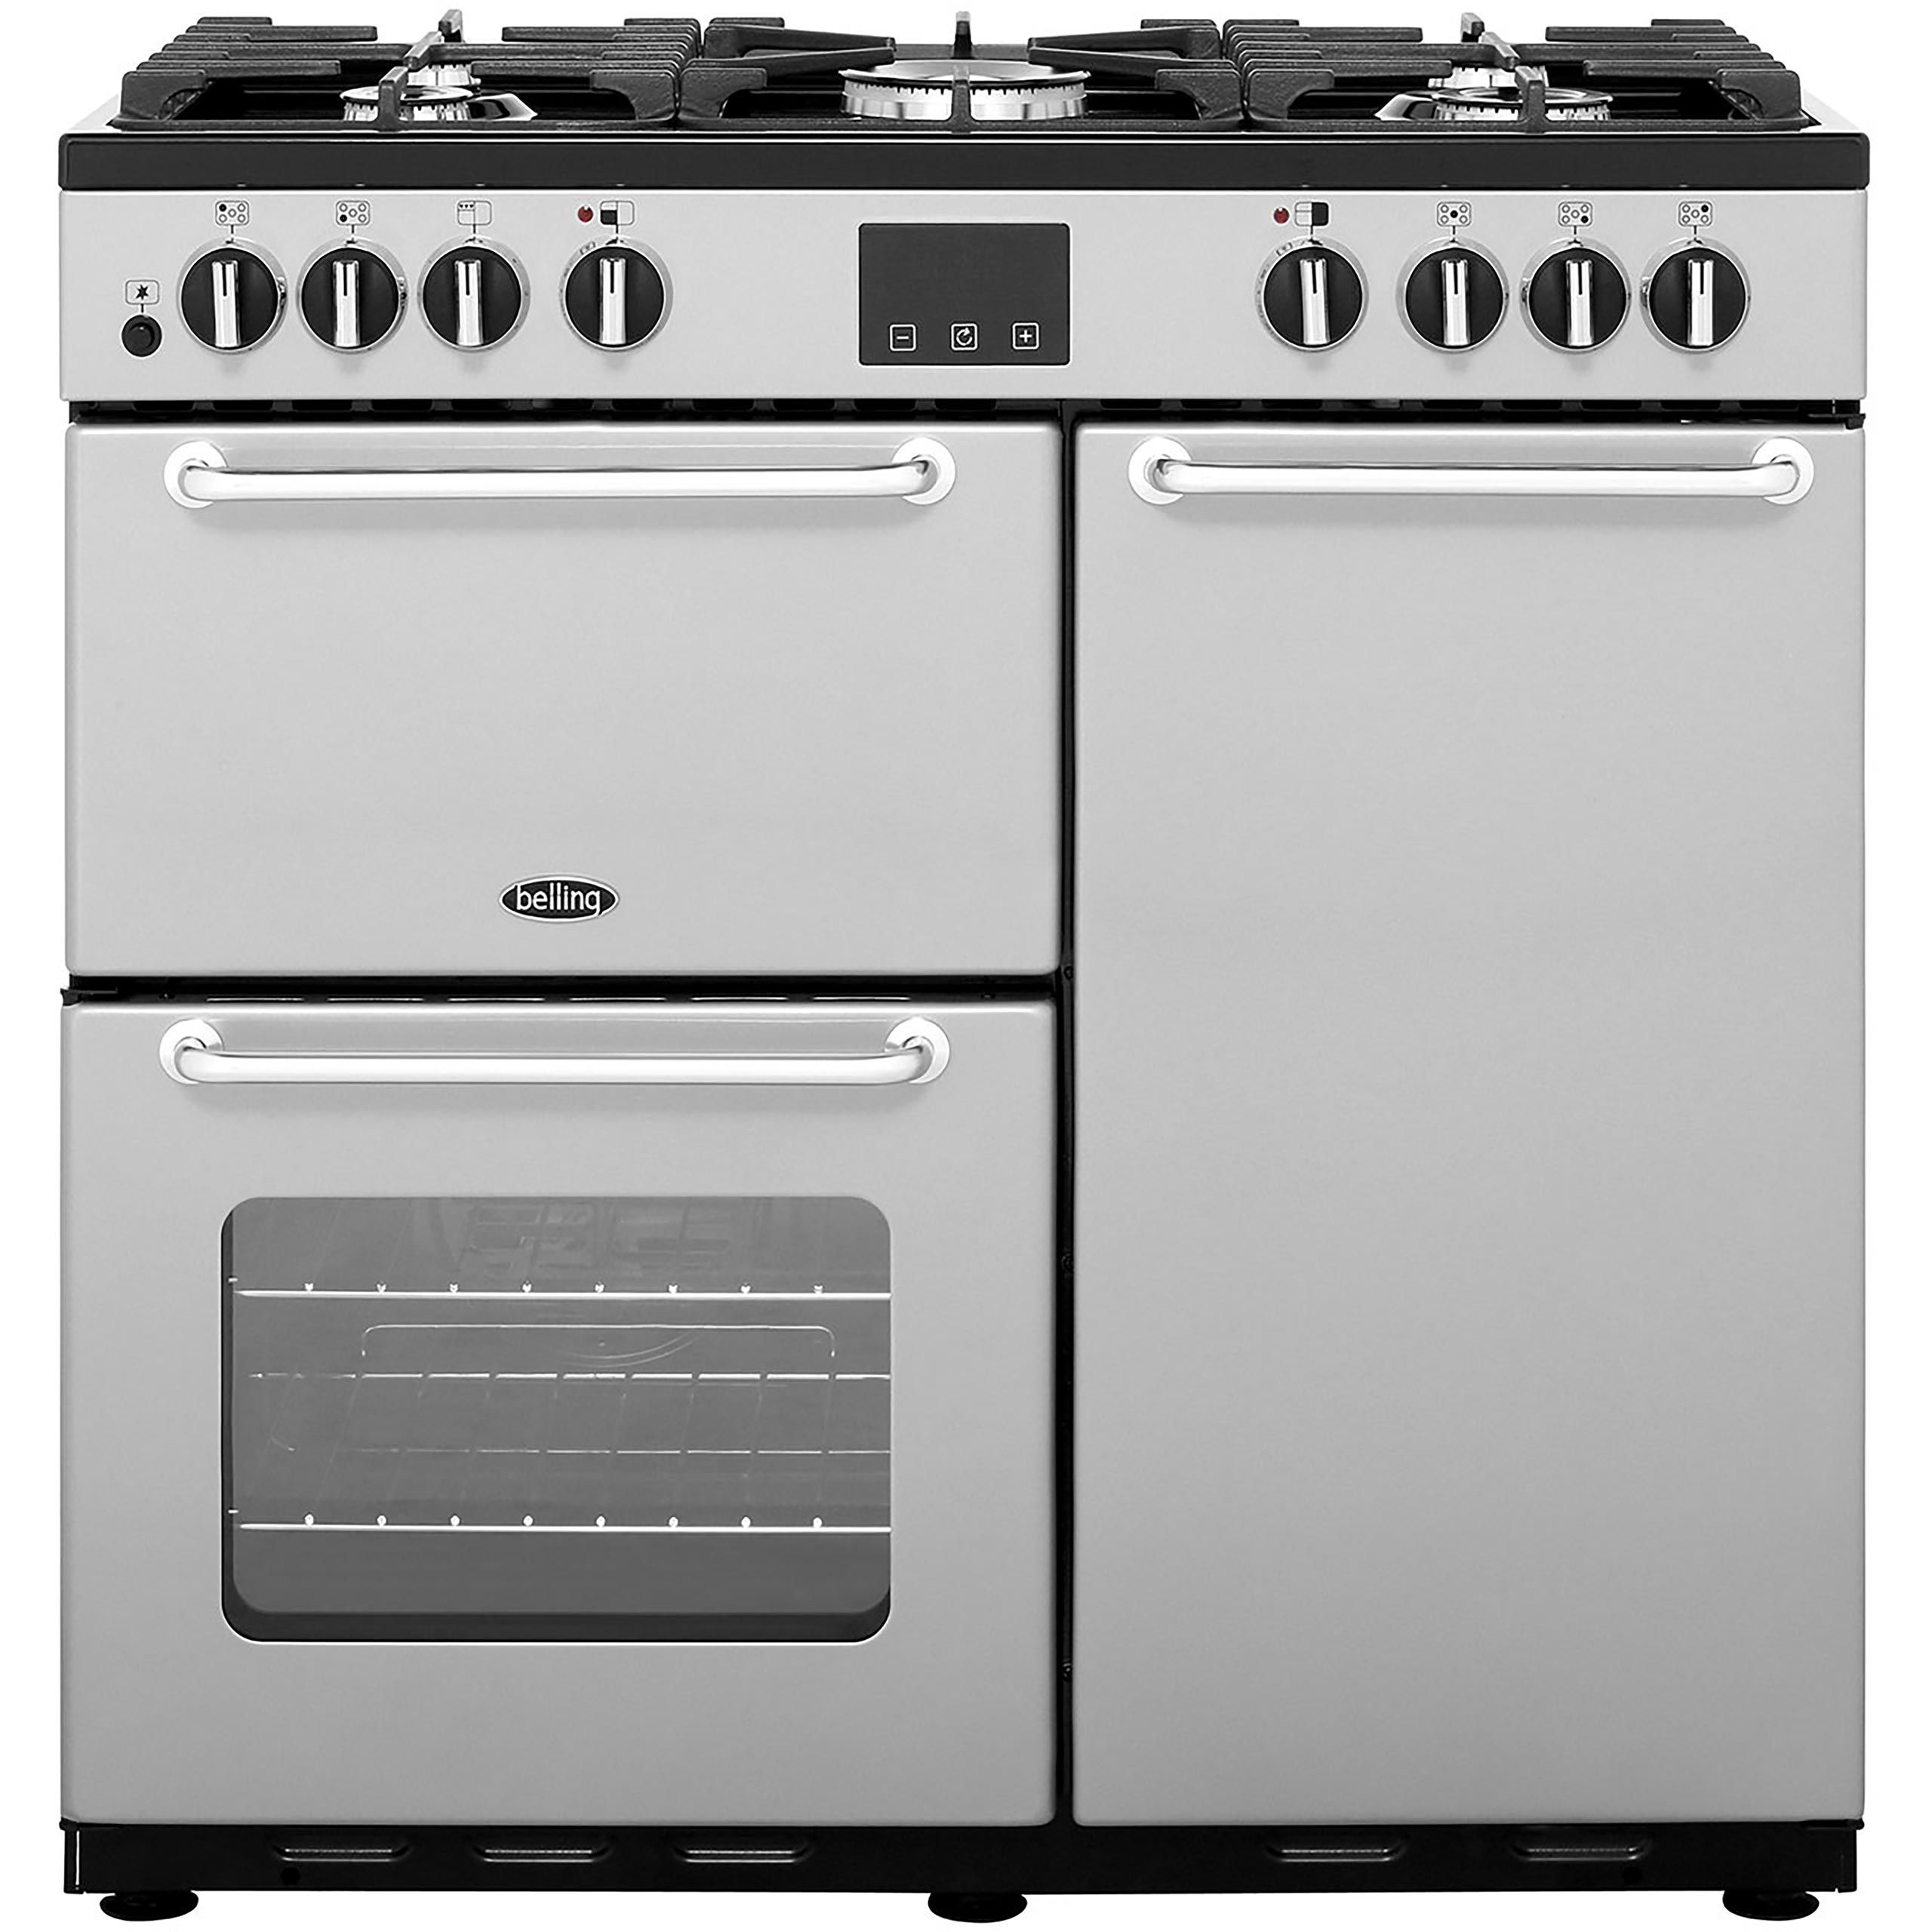 Belling SANDRINGHAM90DFT 90cm Dual Fuel Range Cooker - Silver - A/A Rated, Silver